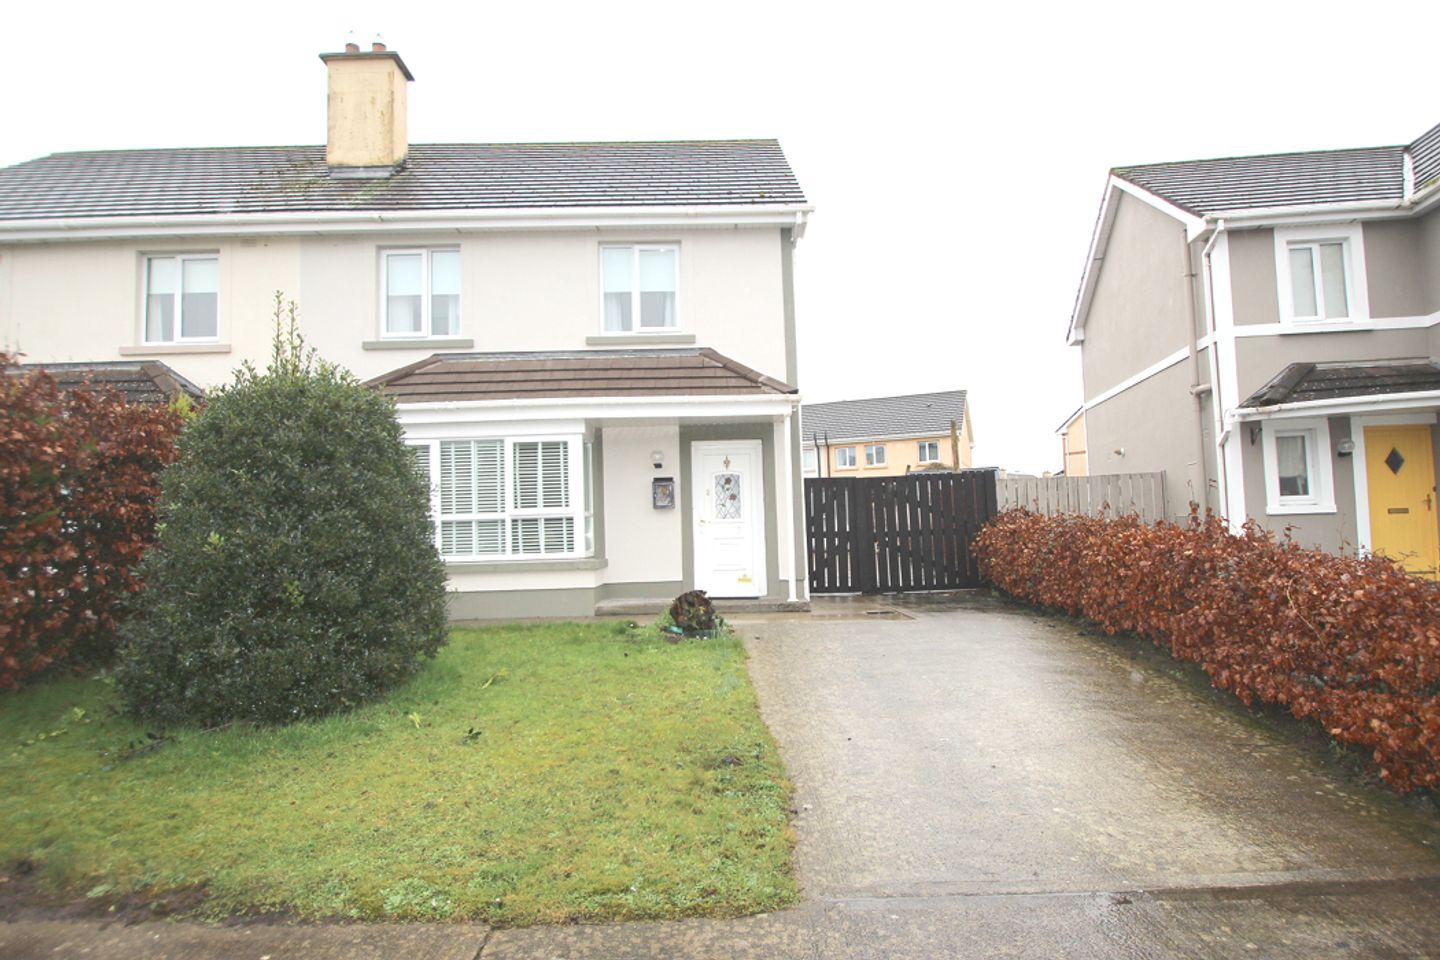 2 Philips Vale, Daingean, Co. Offaly, R35W0F4